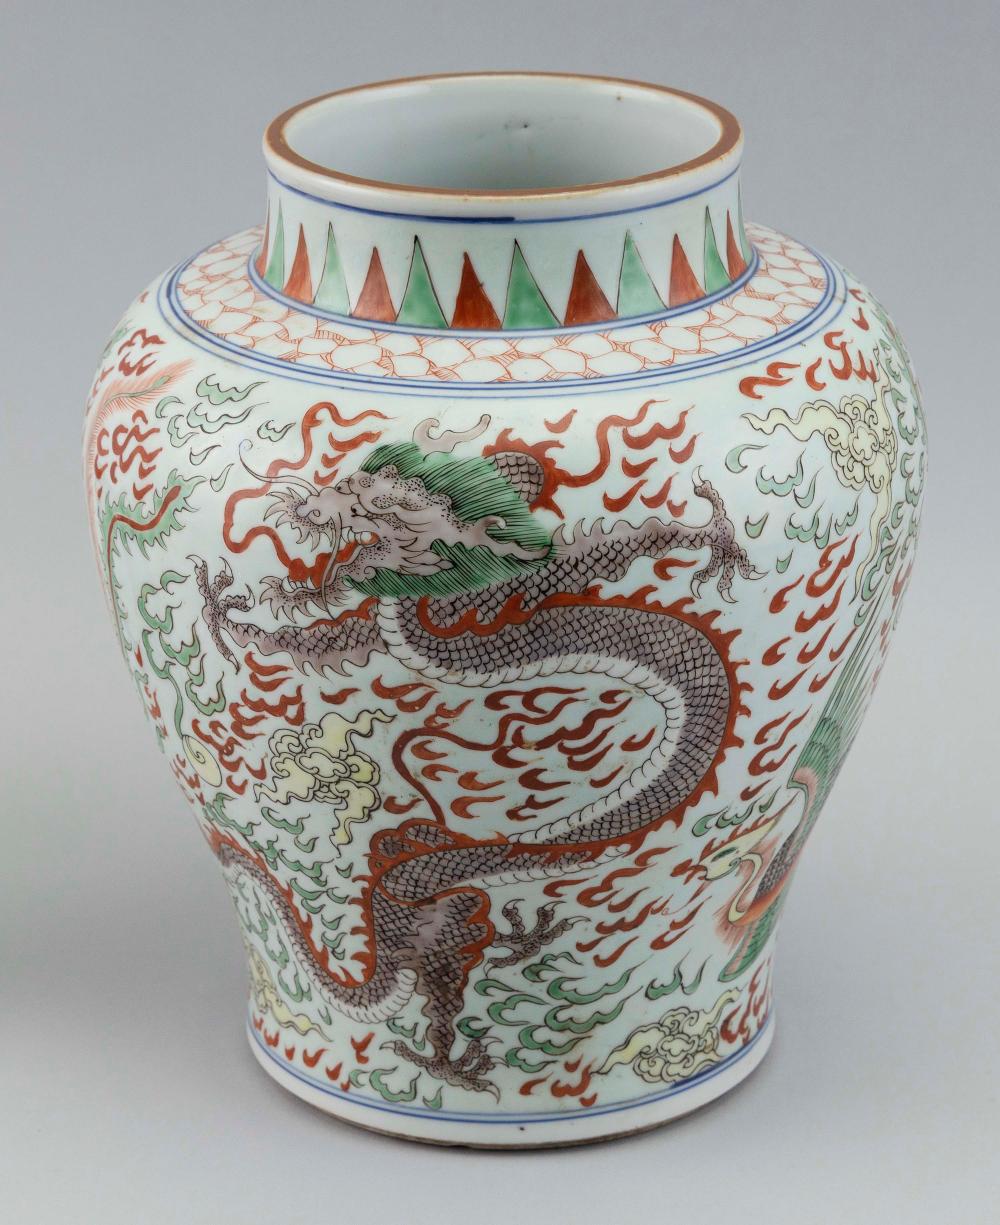 CHINESE WUCAI PORCELAIN VASE EARLY 2f202c